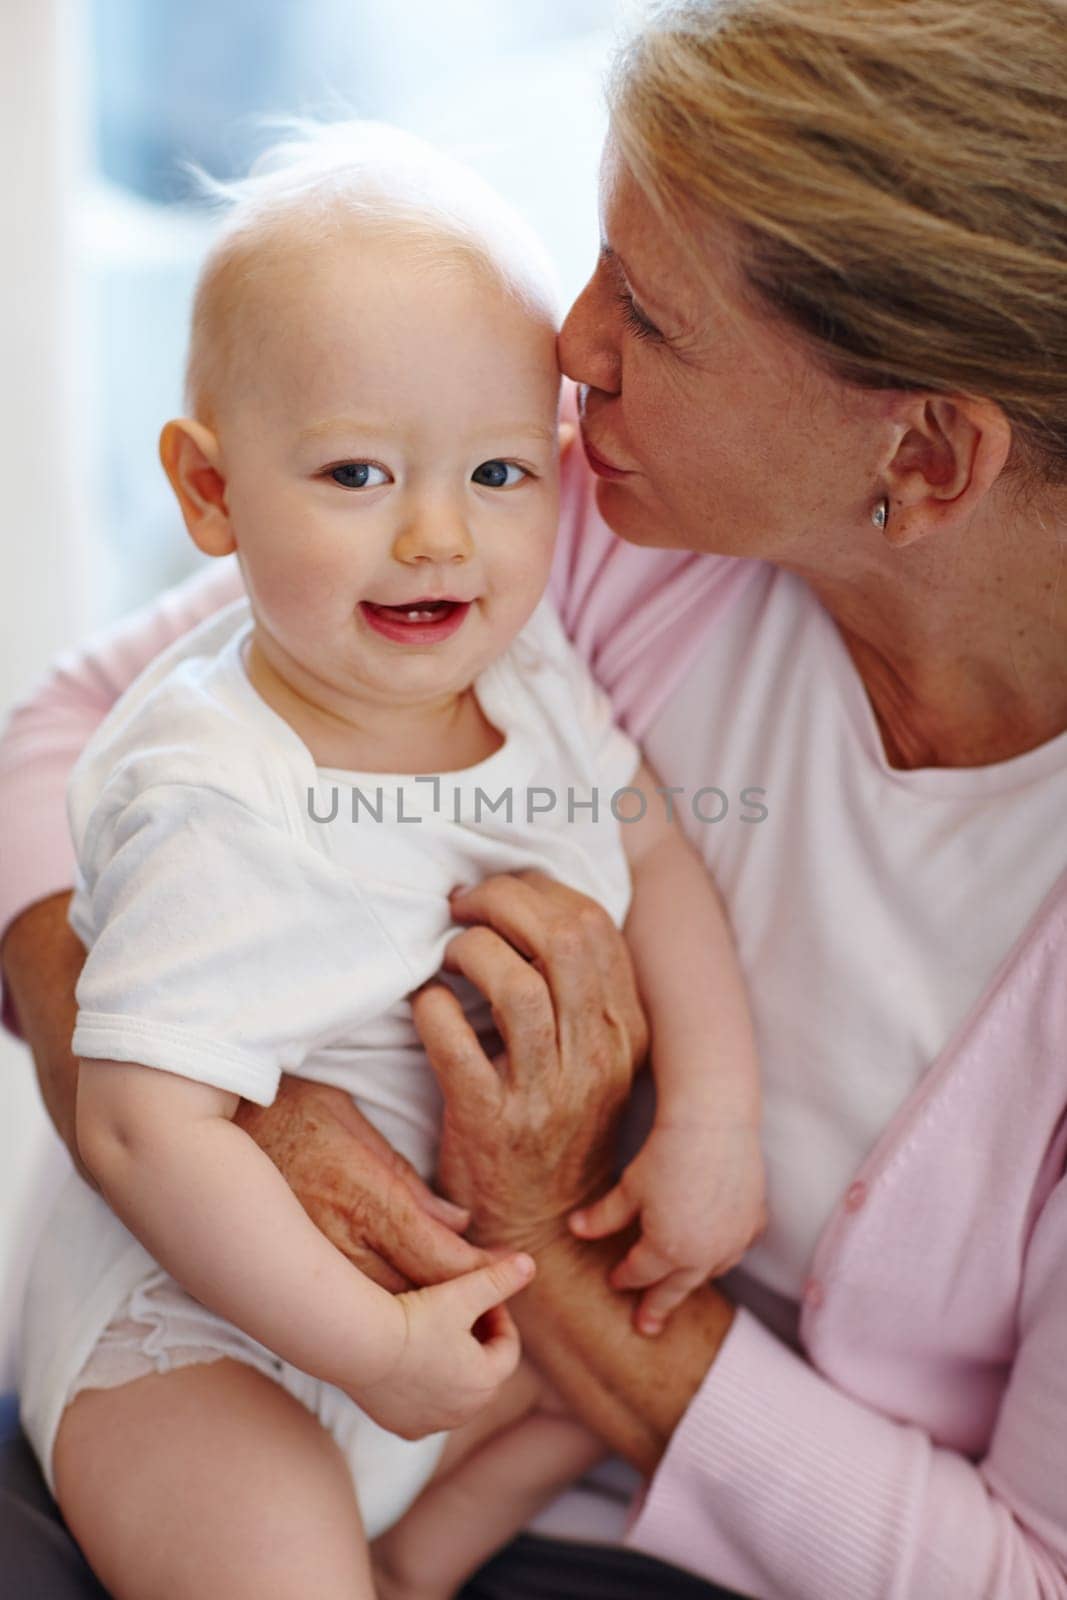 Happy, baby and grandmother kiss in portrait with love for family, bonding and development. Cute, child and grandma hug at home together with attention, kindness and care while babysitting newborn.